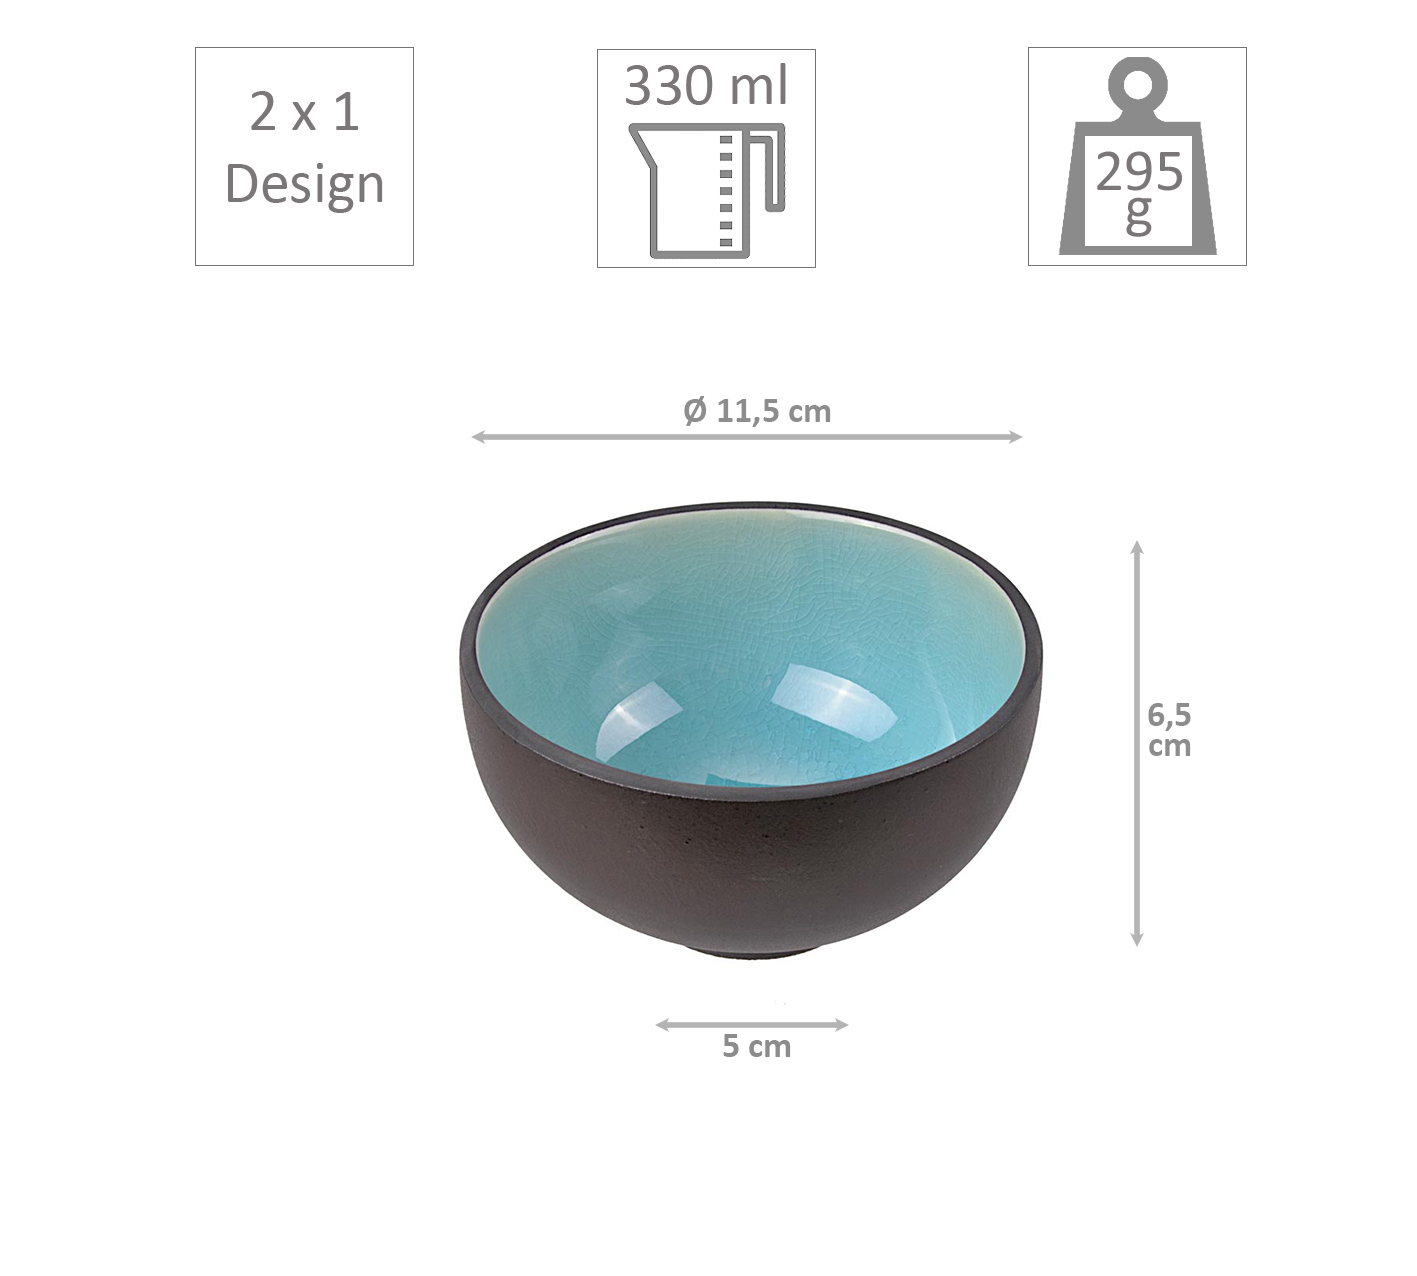 Sushi sets with asian design buy online for less! - TDS